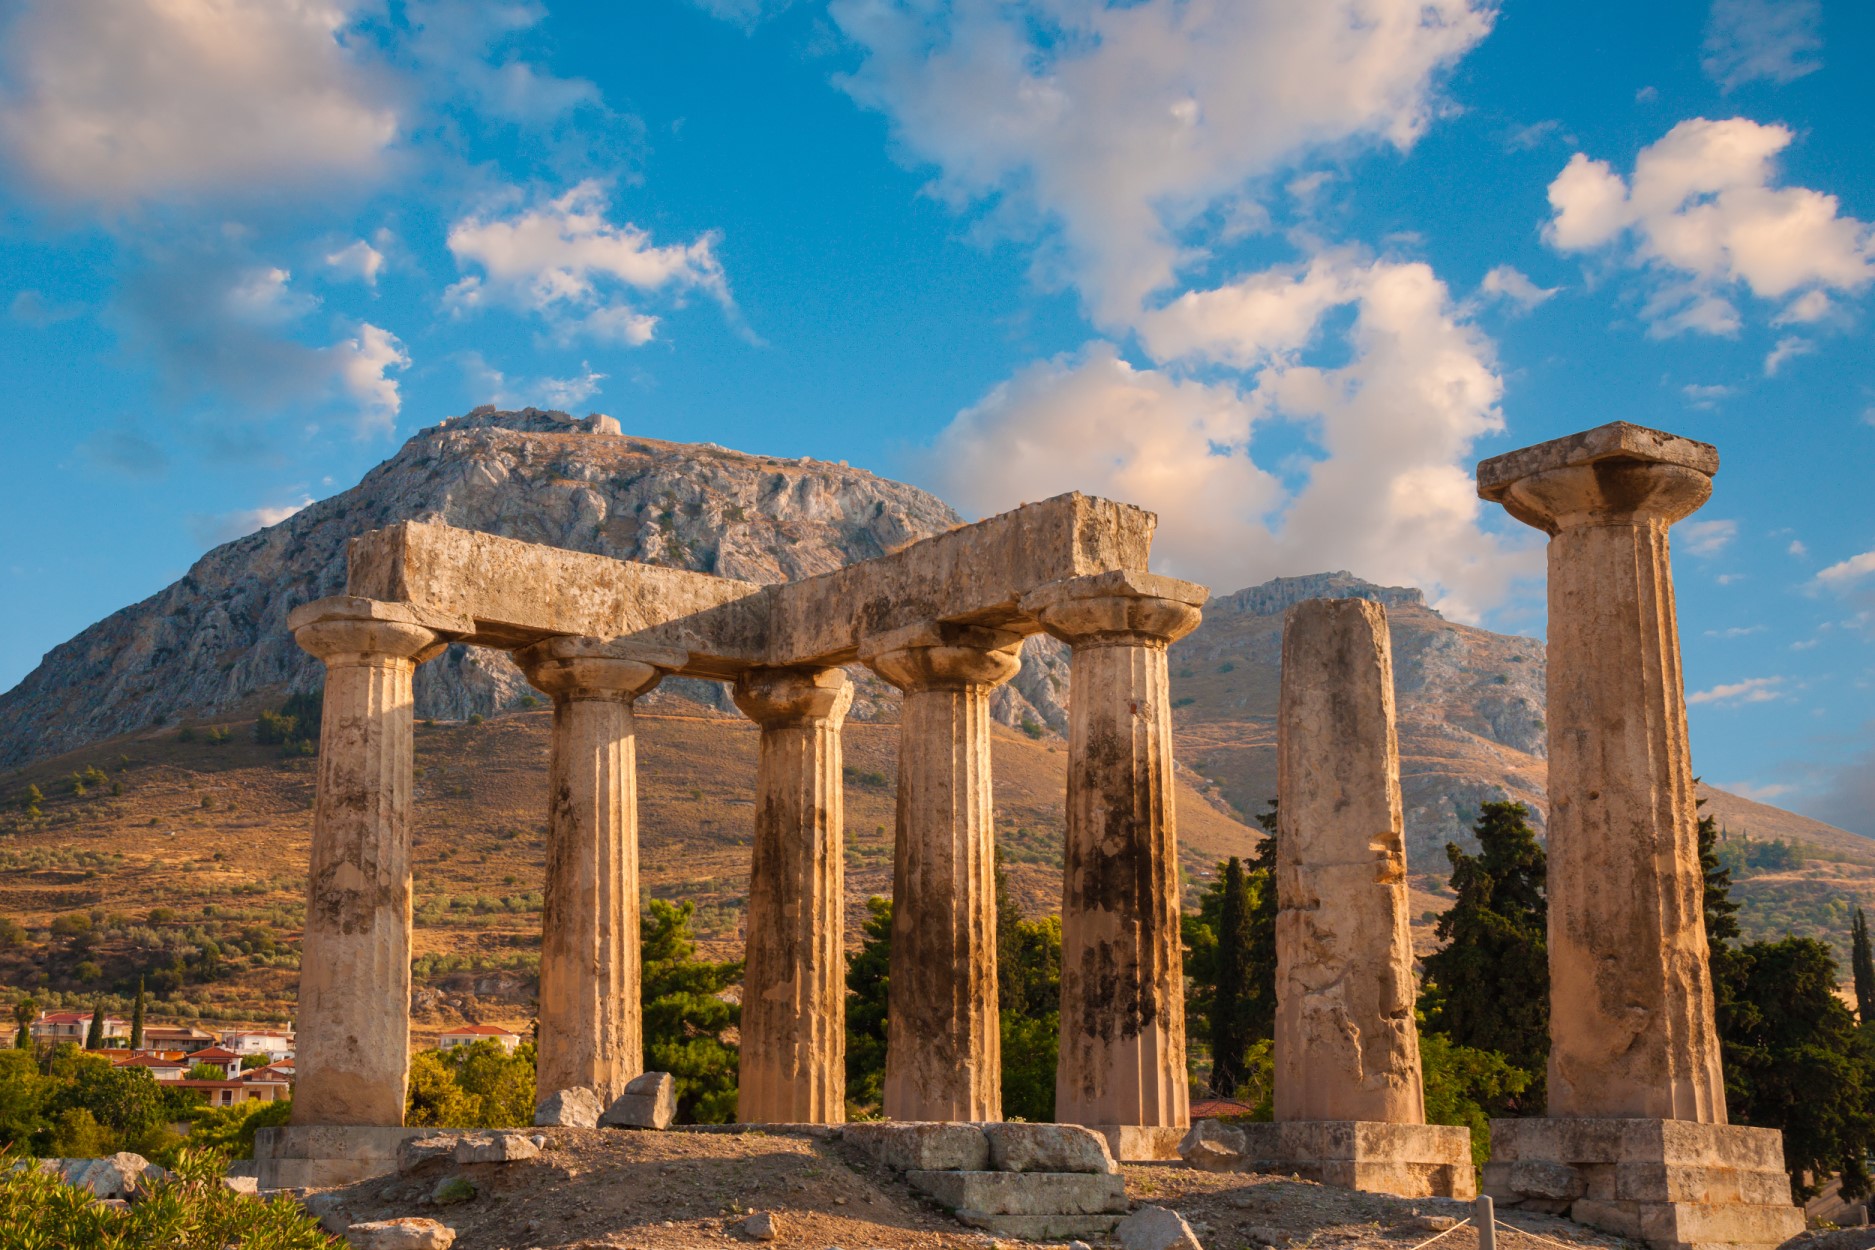 Corinth, Greece - Monterrasol small group tours to Corinth, Greece. Travel agency offers small group car tours to see Corinth in Greece. Order small group tour to Corinth with departure date on request.